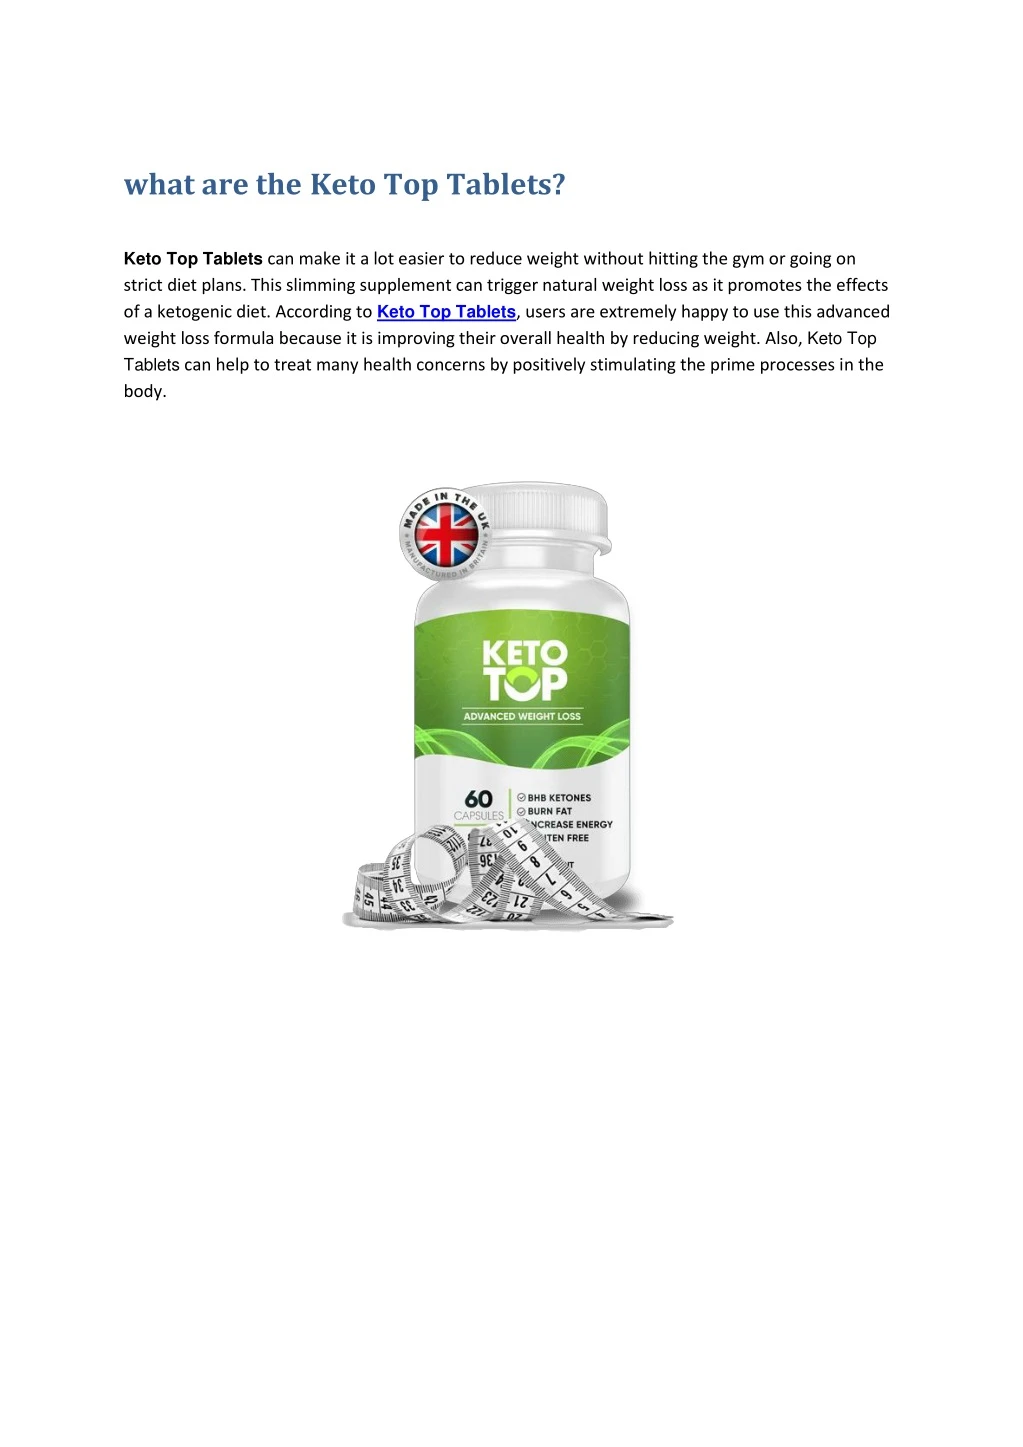 what are the keto top tablets